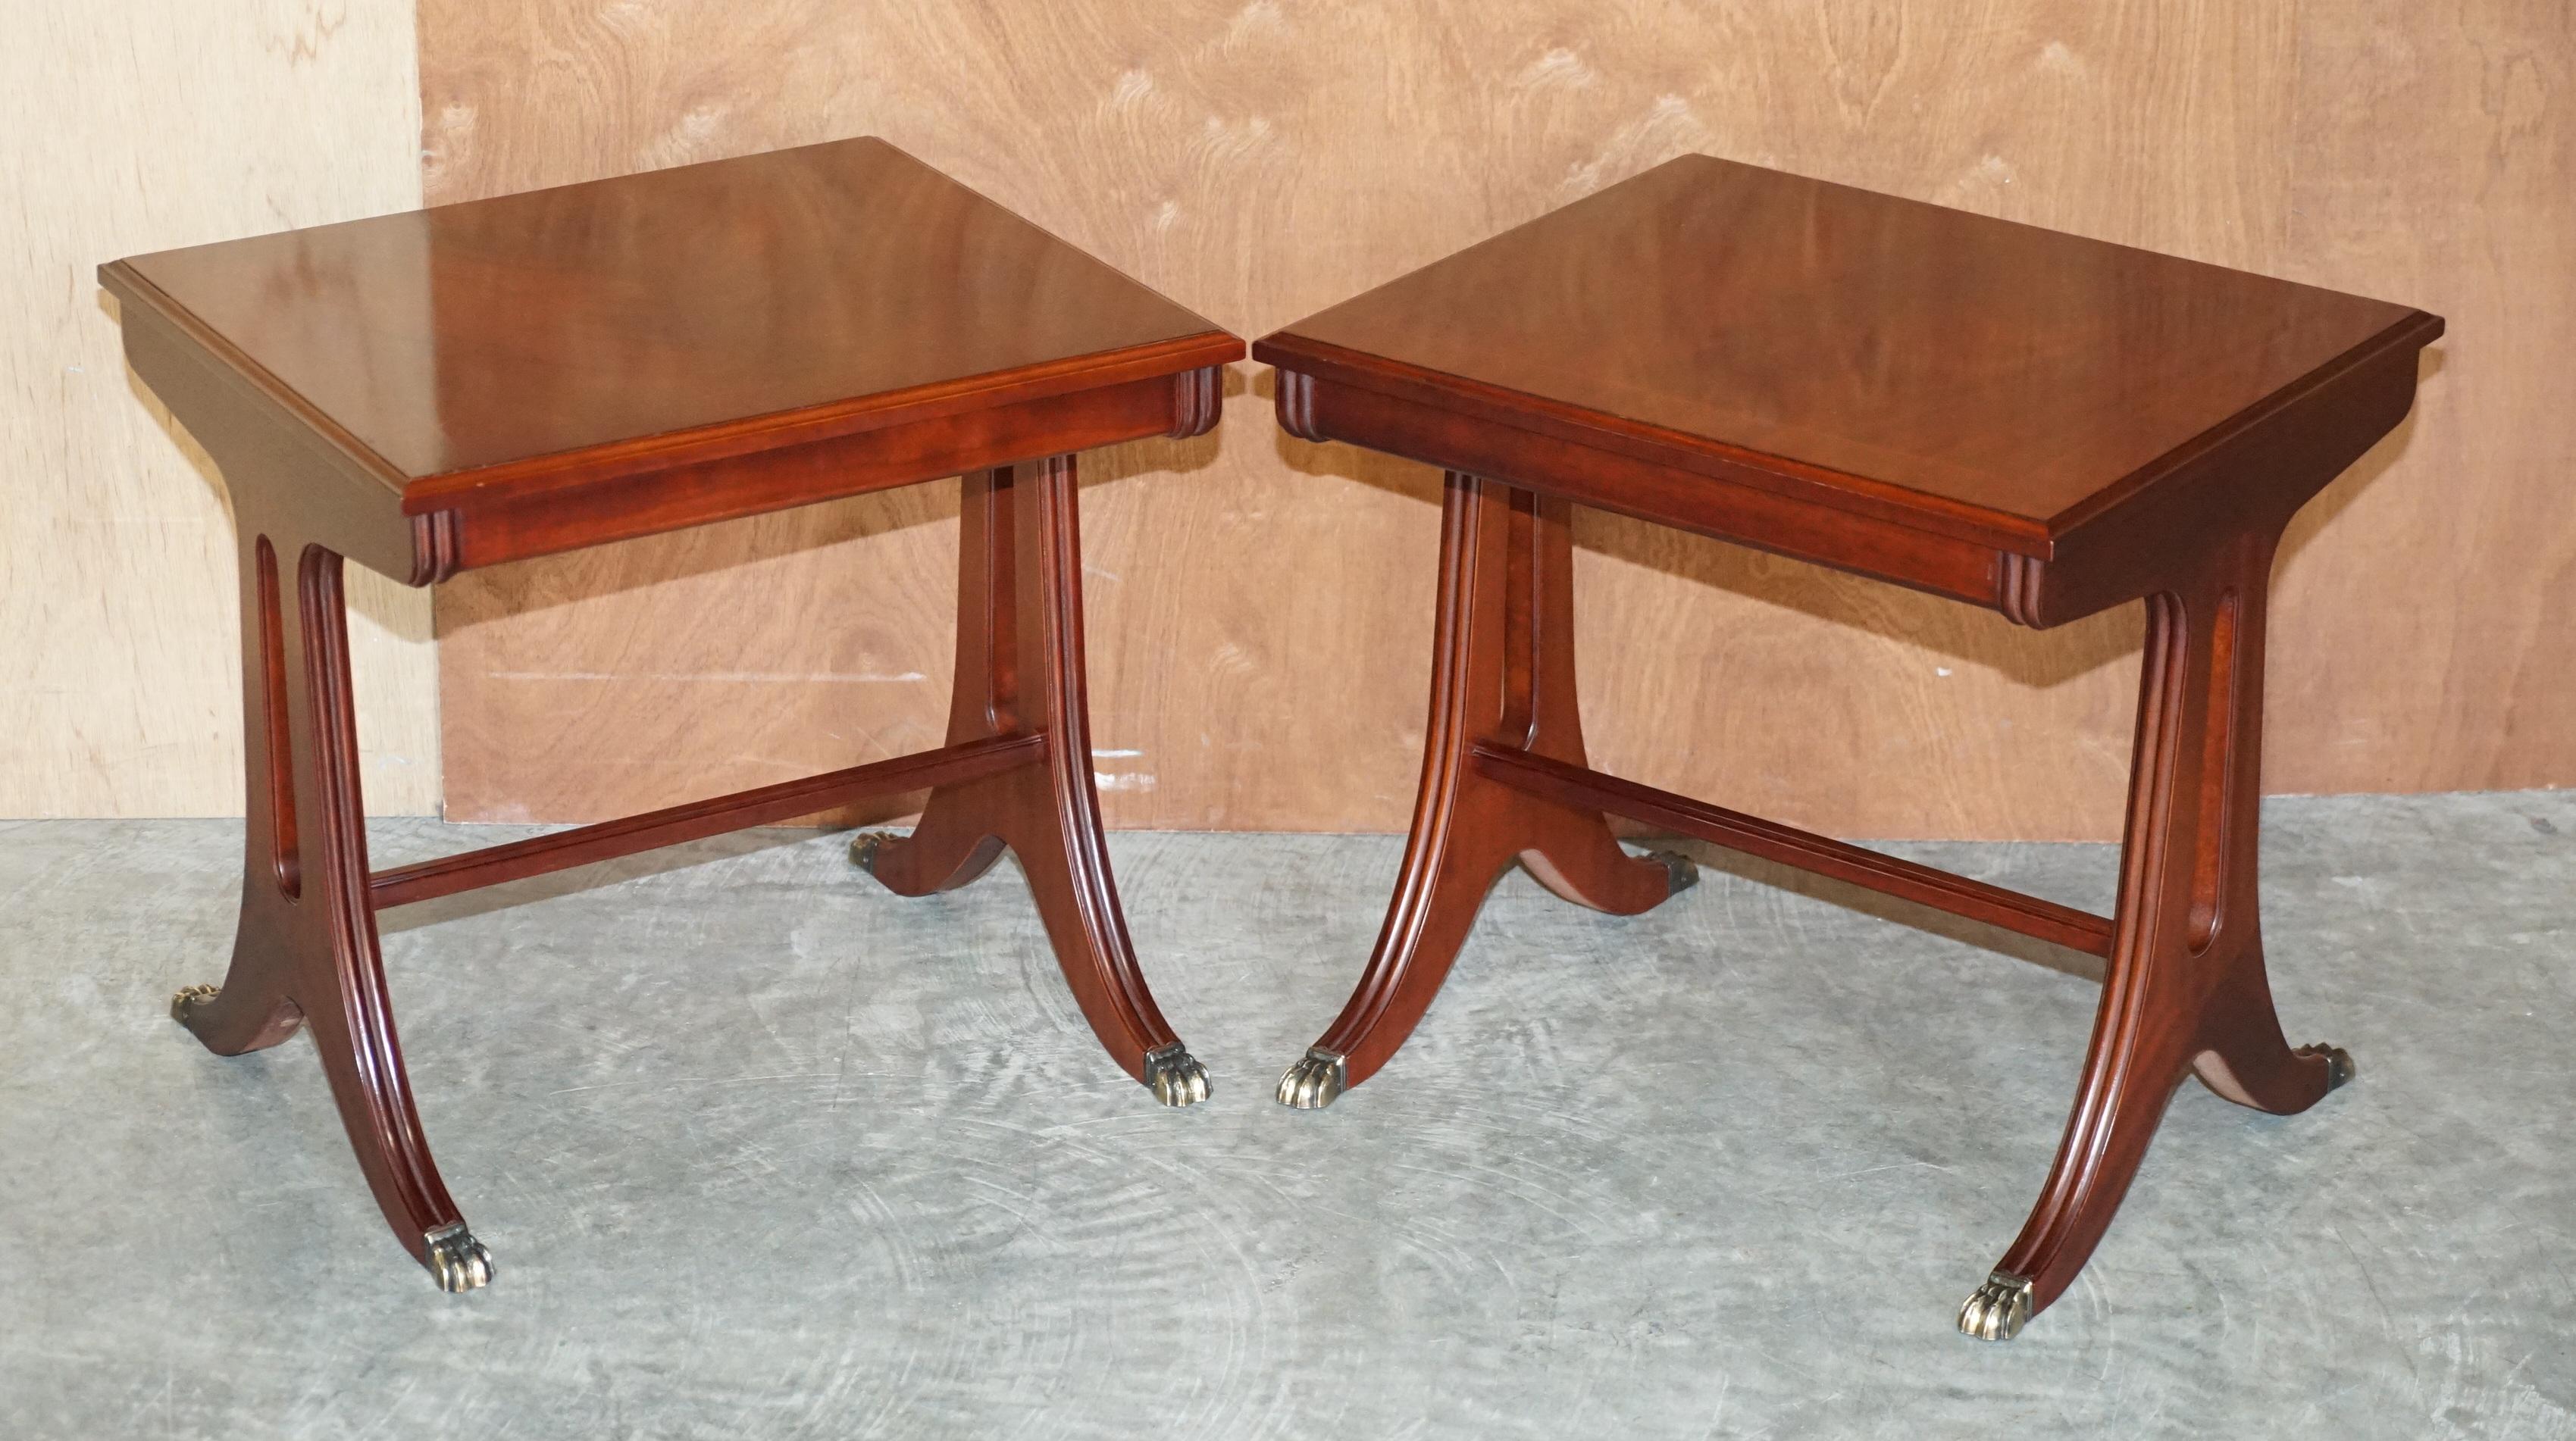 We are delighted to offer for sale this lovely pair of tables which have flamed mahogany tops and lions hairy paw brass feet

A very good looking and well made pair, the timber patina to the top is very nice, the feet offer a touch of style and